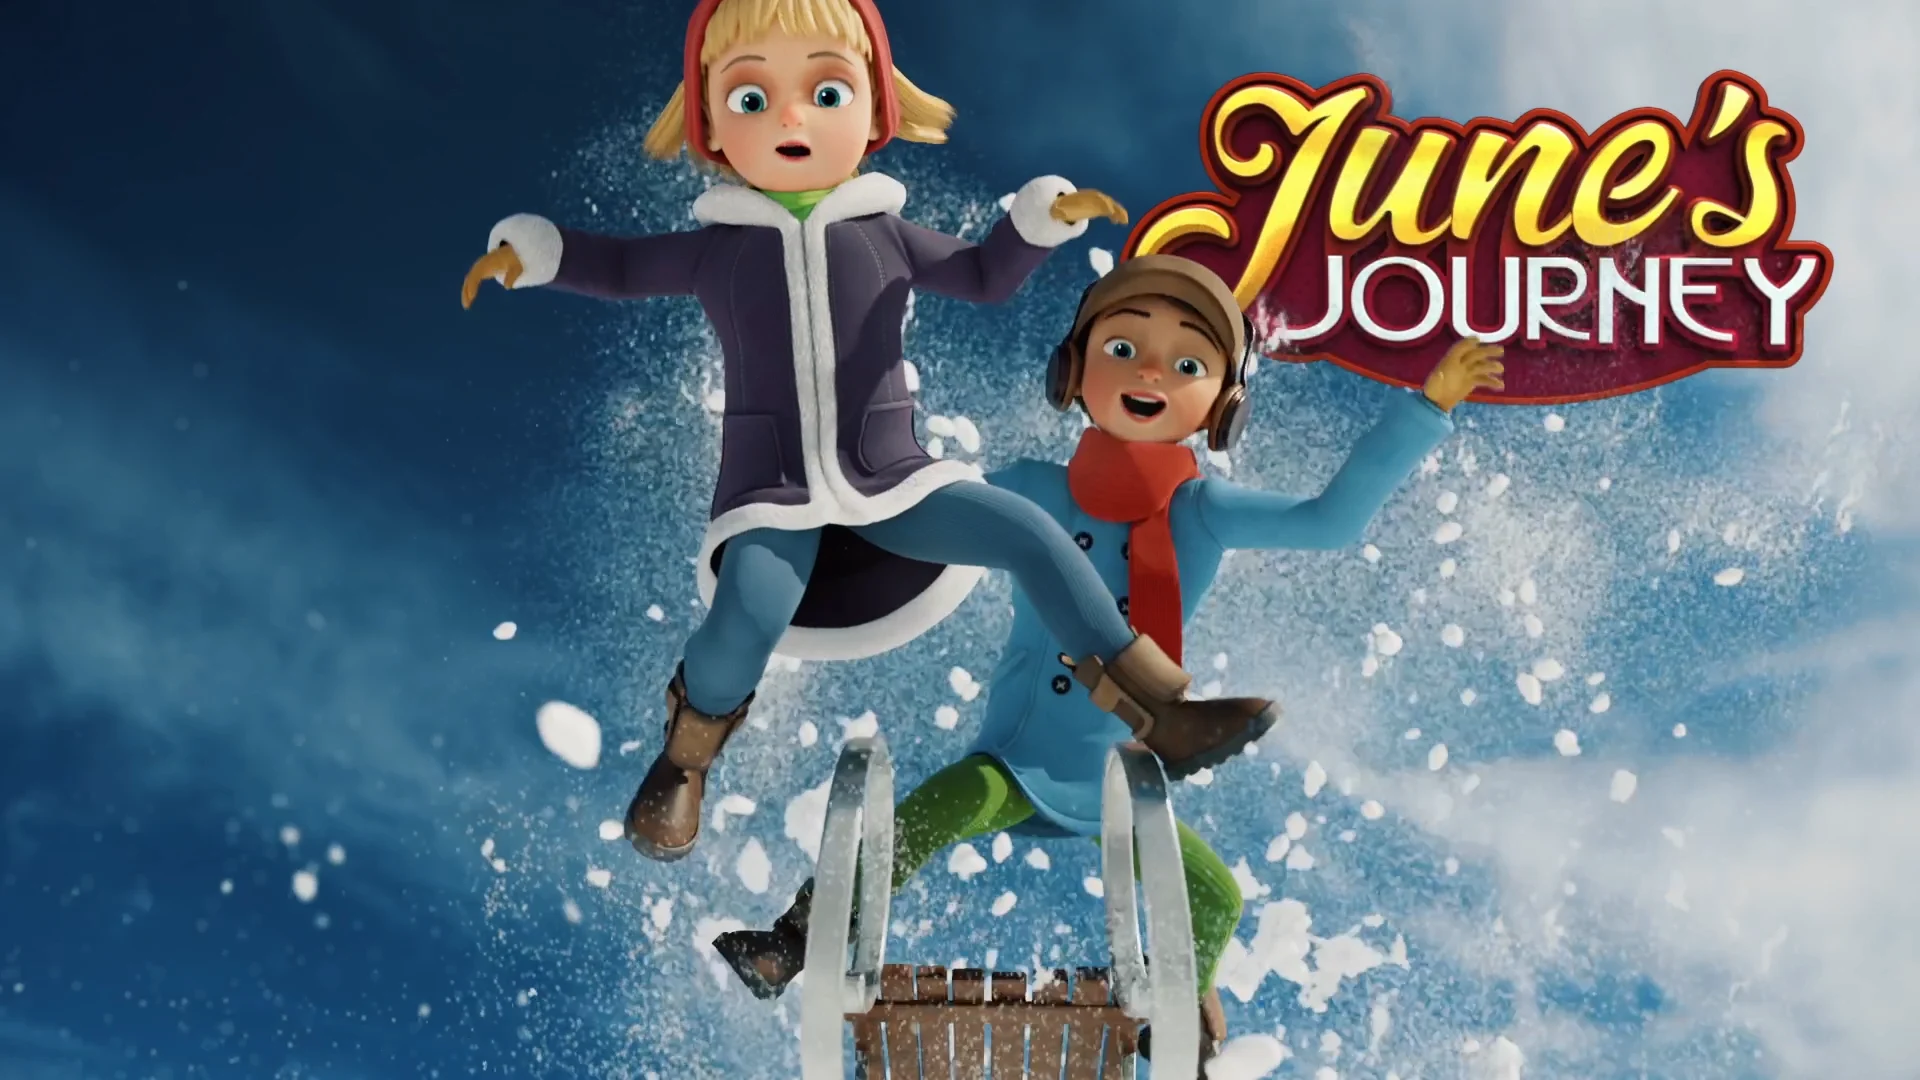 two cartoon characters (a boy and a girl) falling from a slegde after a jump. the Logo JUNE'S JOURNEY is written next to them